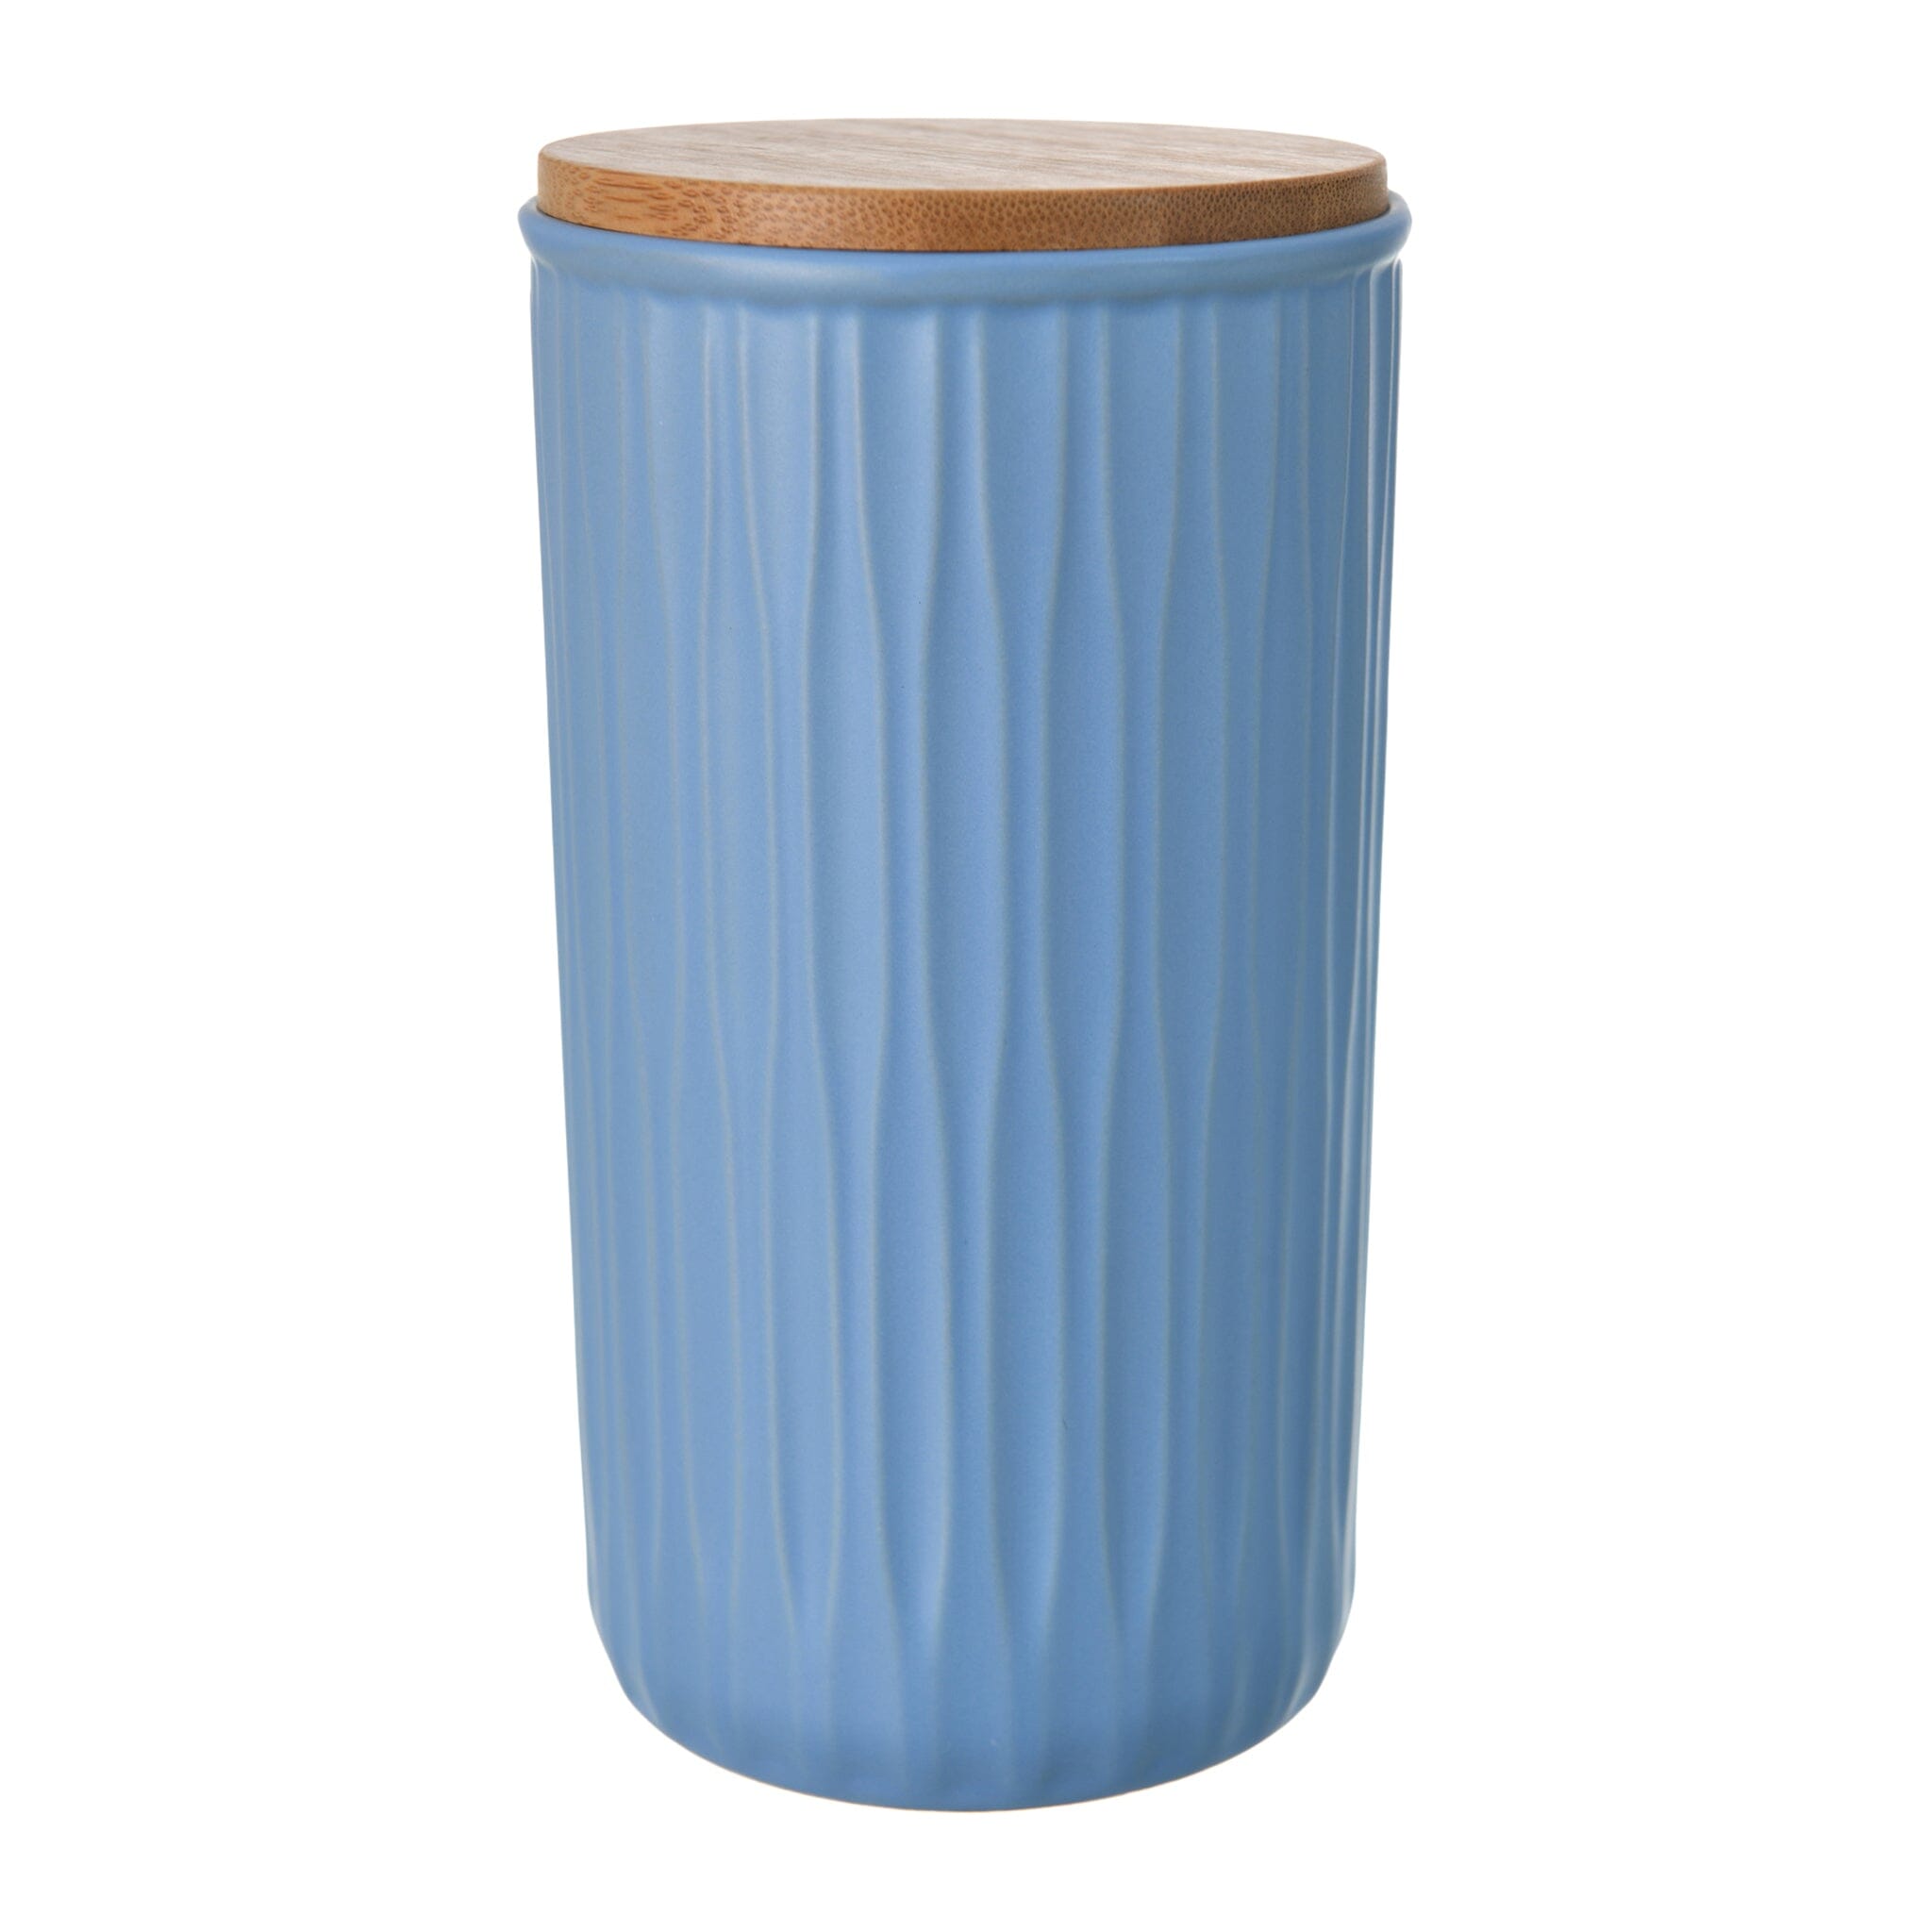 O'lala - Ceramic Jar with Wooden Cover - Blue - 10x18cm - 520008061